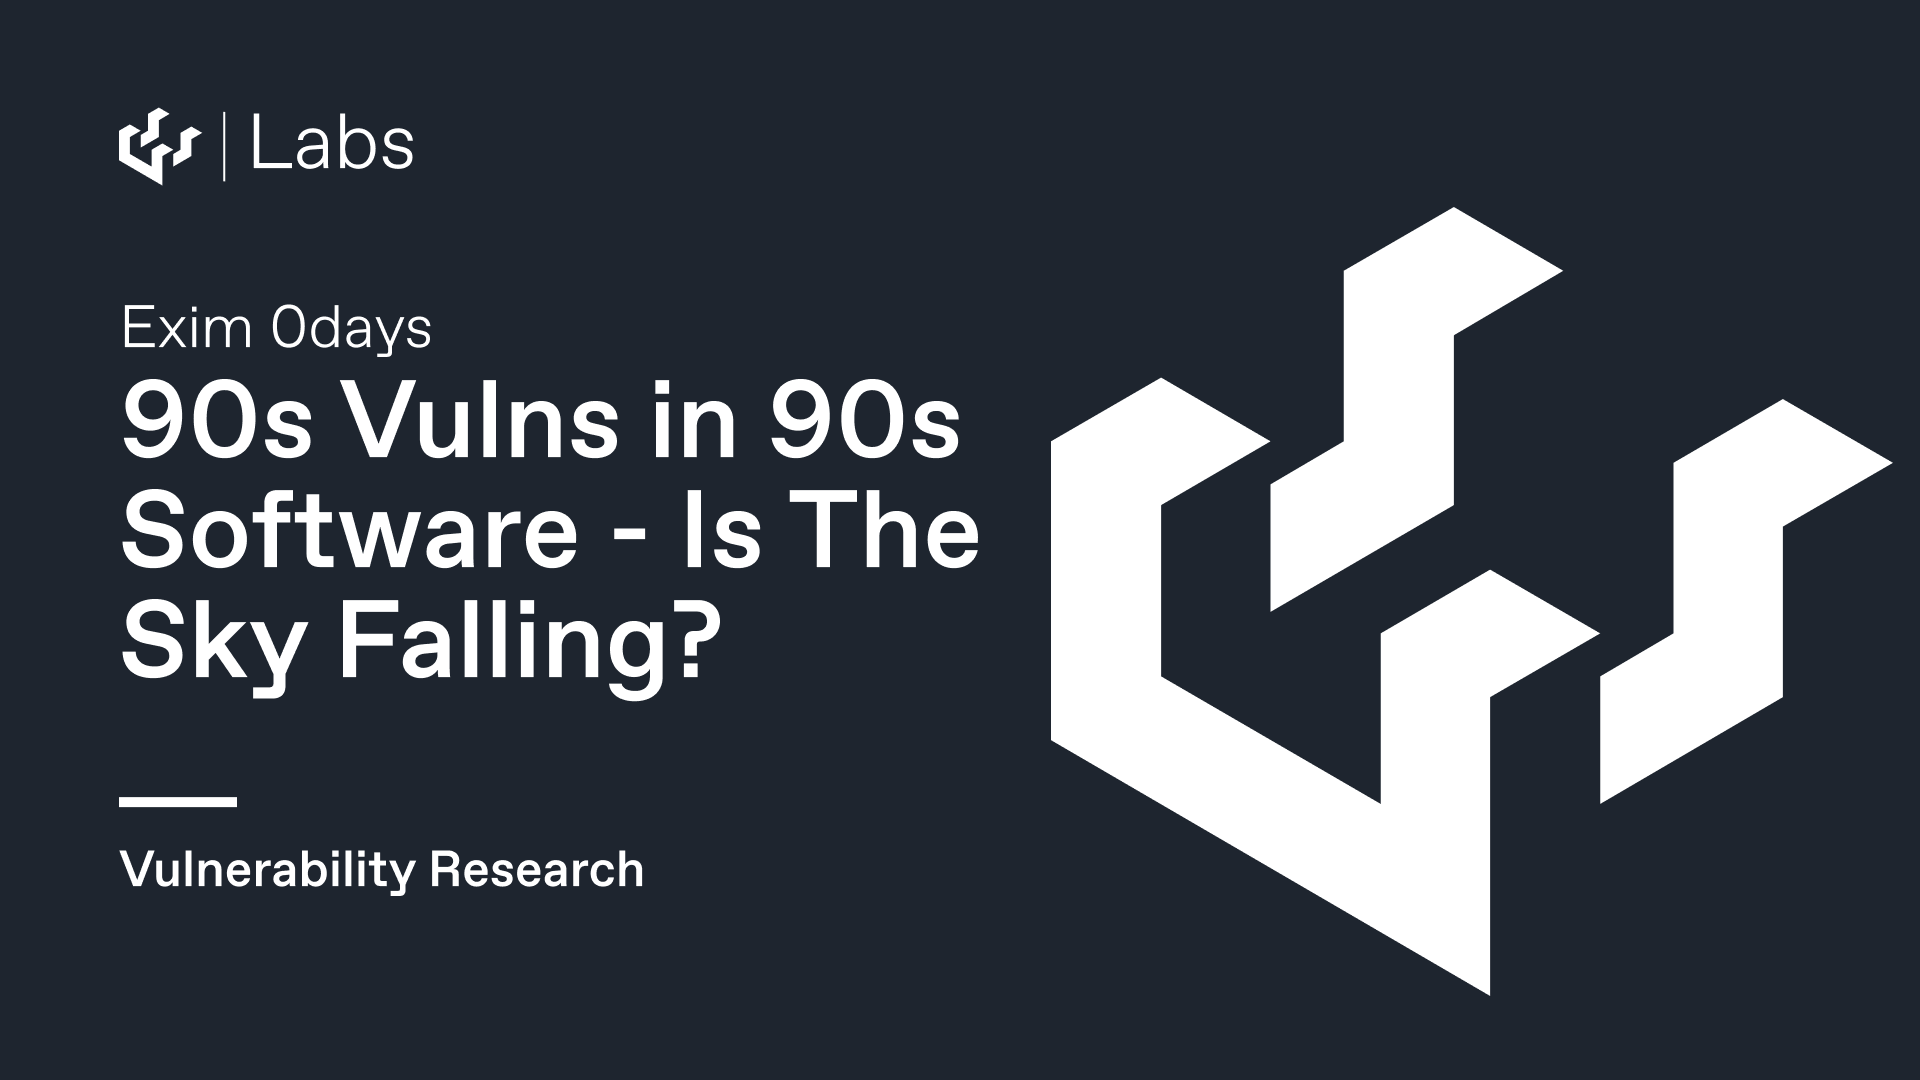 90s Vulns In 90s Software (Exim) - Is the Sky Falling?